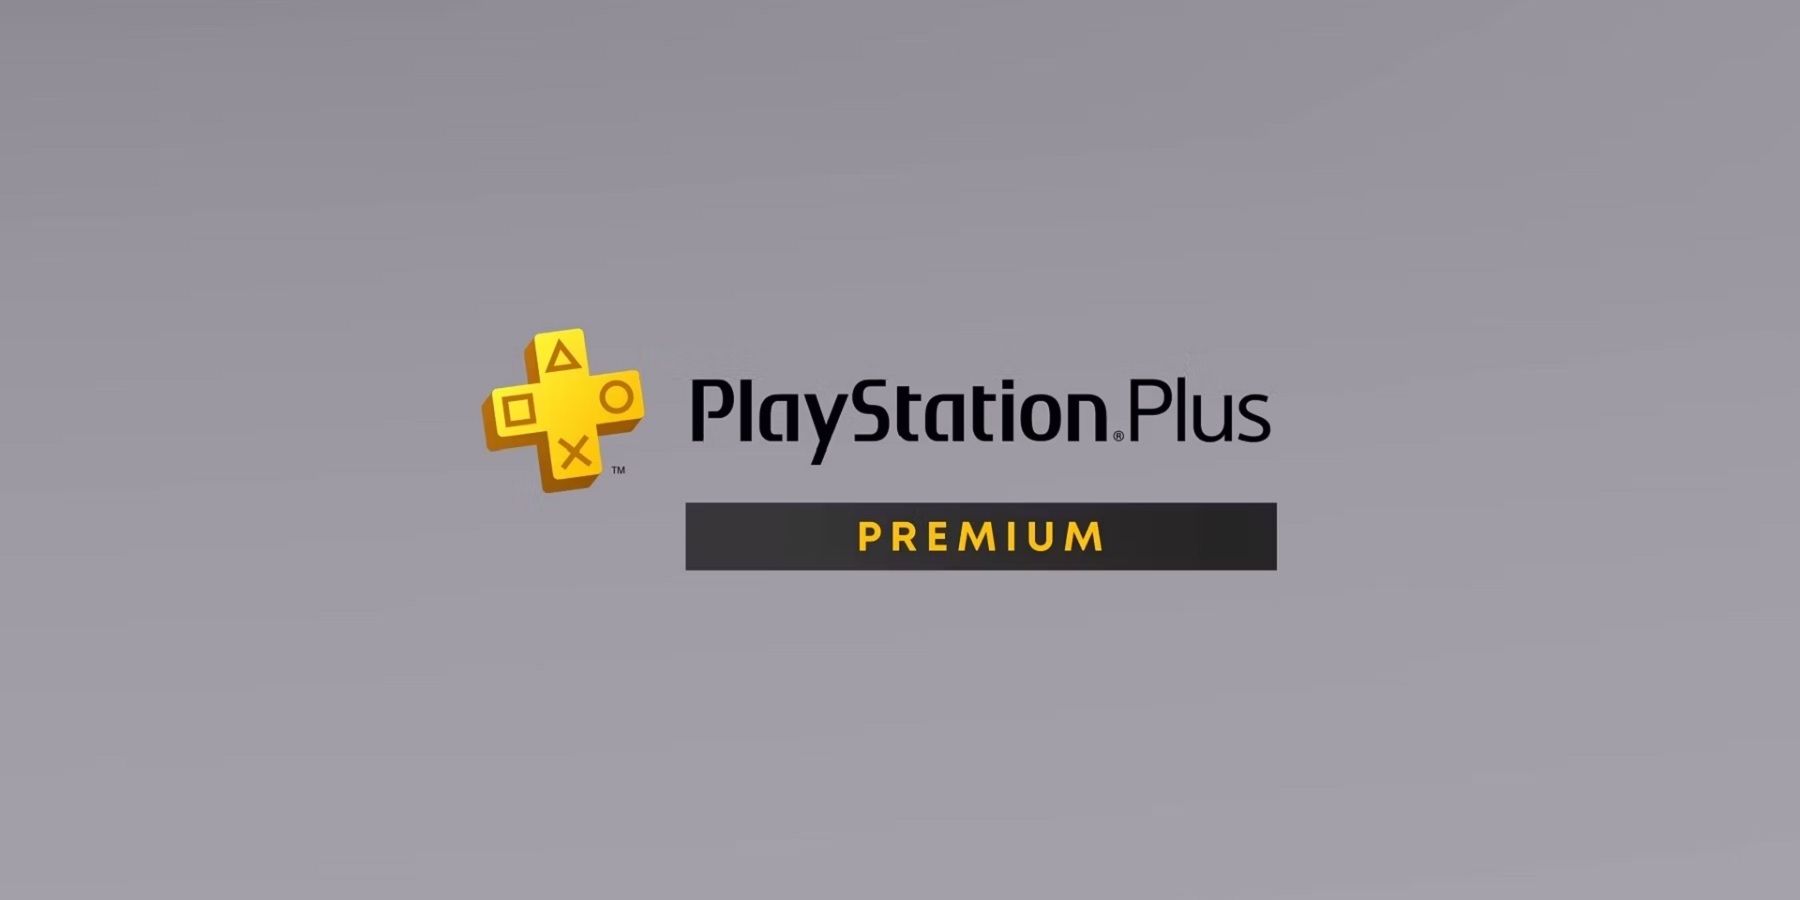 PS Plus Premium Adds 18 Games Today, Including Surprise PSP Game and Day One Release